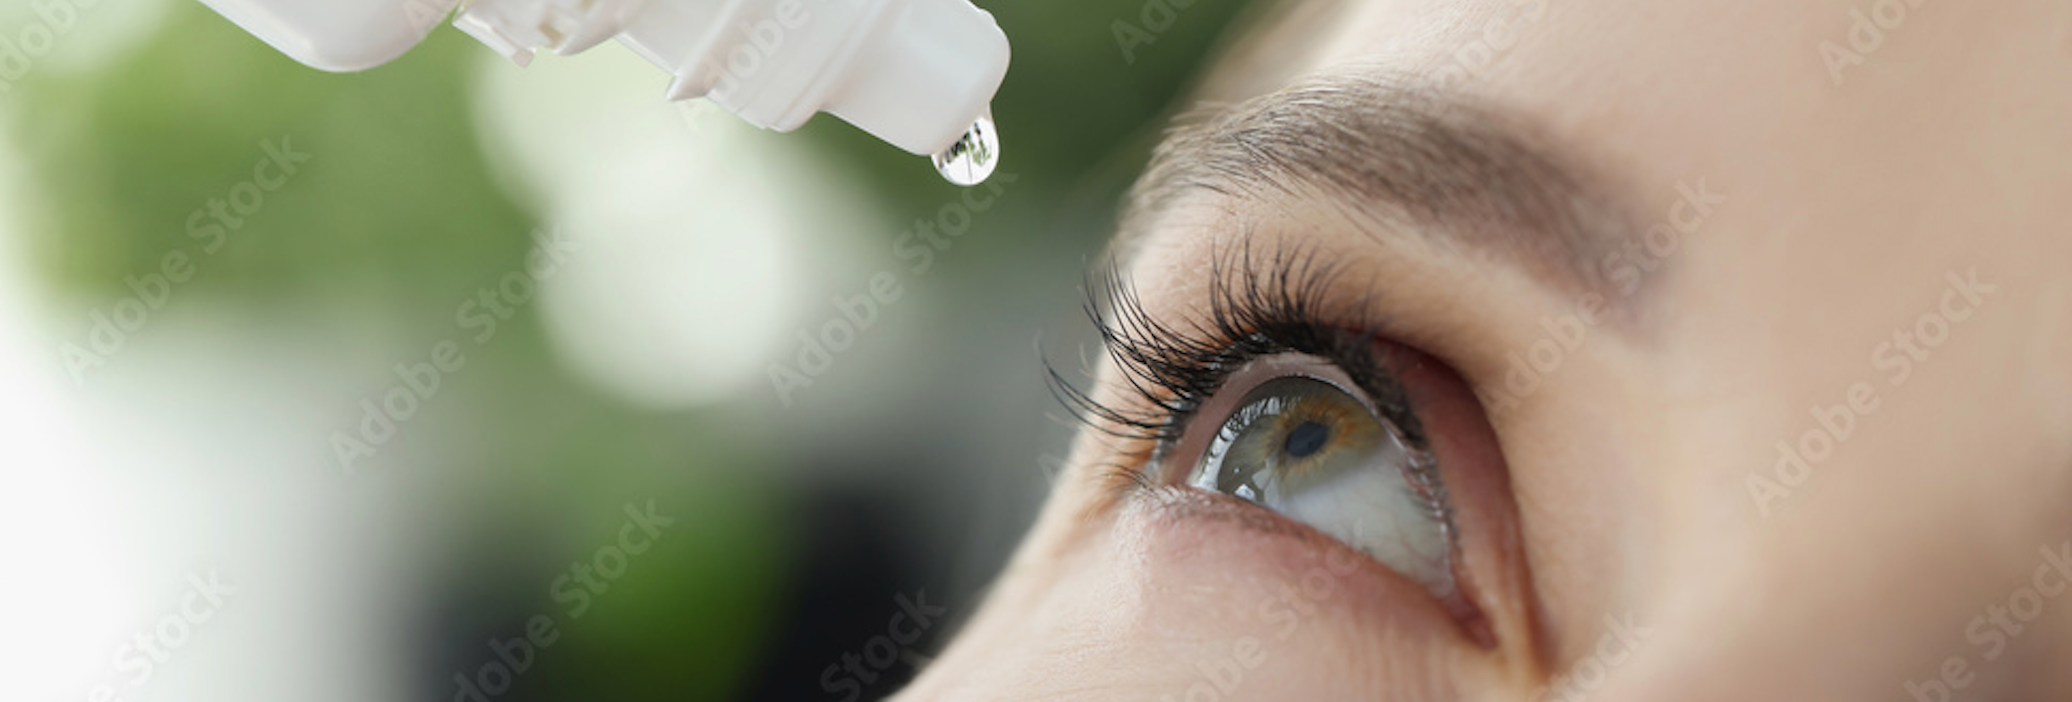 According to its news release, the CDC is recommending that clinicians and patients immediately discontinue the use of EzriCare Artificial Tears until the epidemiological investigation and laboratory analyses are complete. (Adobe Stock image)